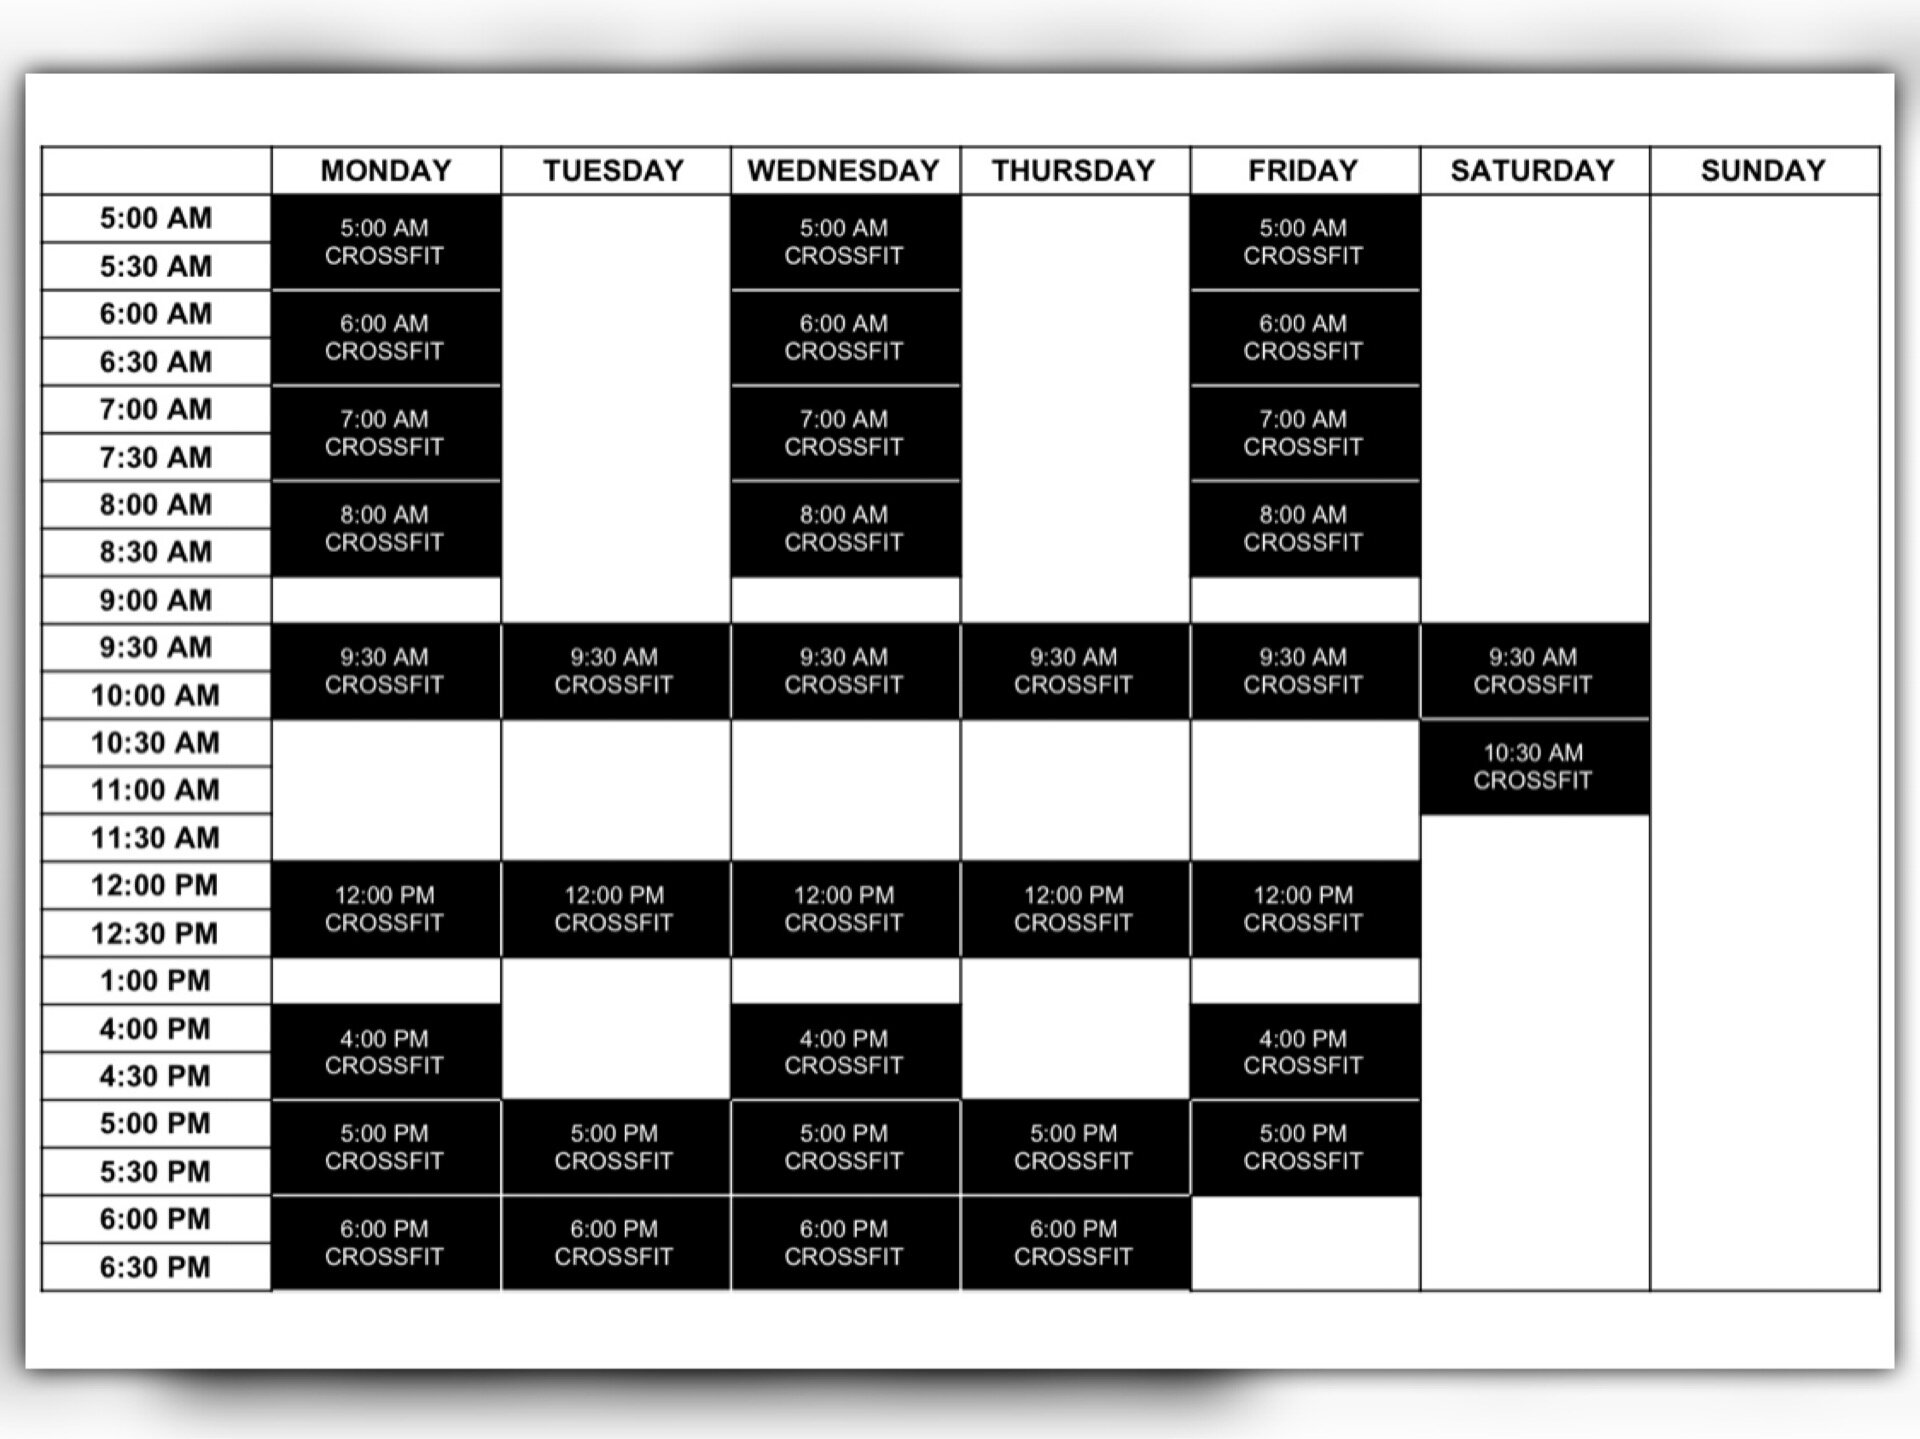 Phase 3 Gym Schedule Crossfit Onefifty